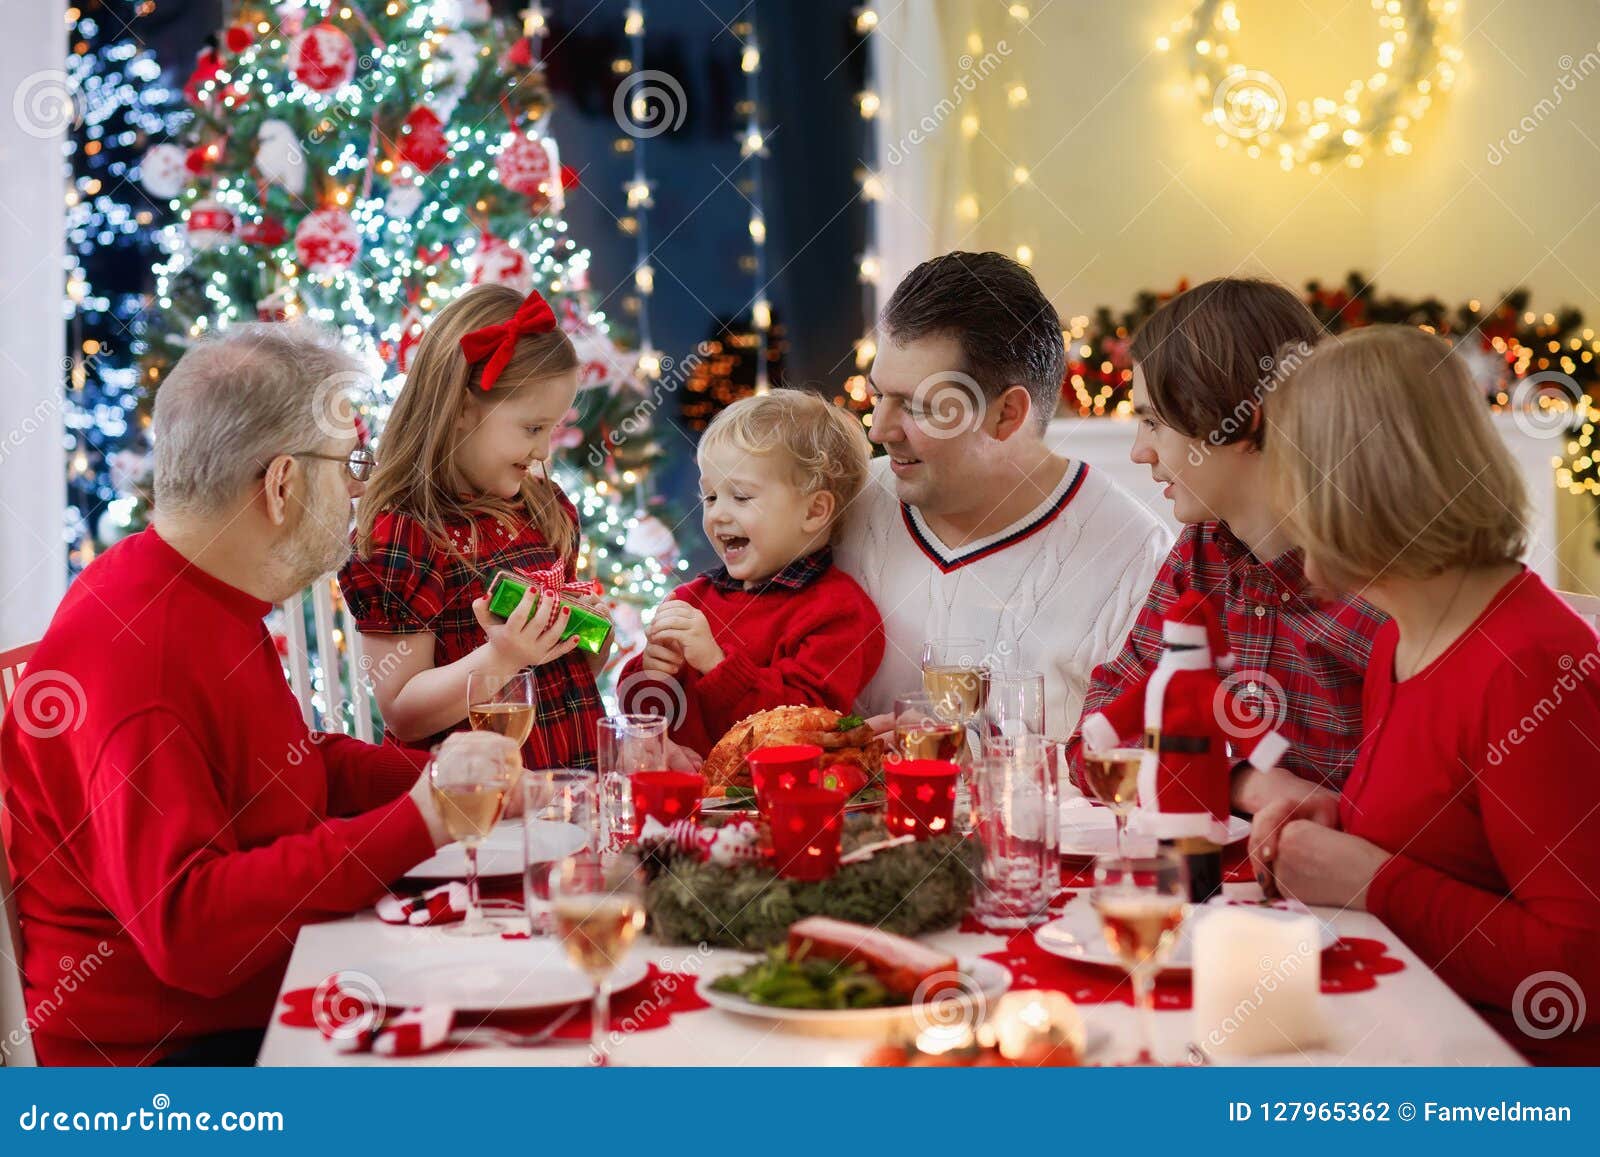 family with kids having christmas dinner at tree